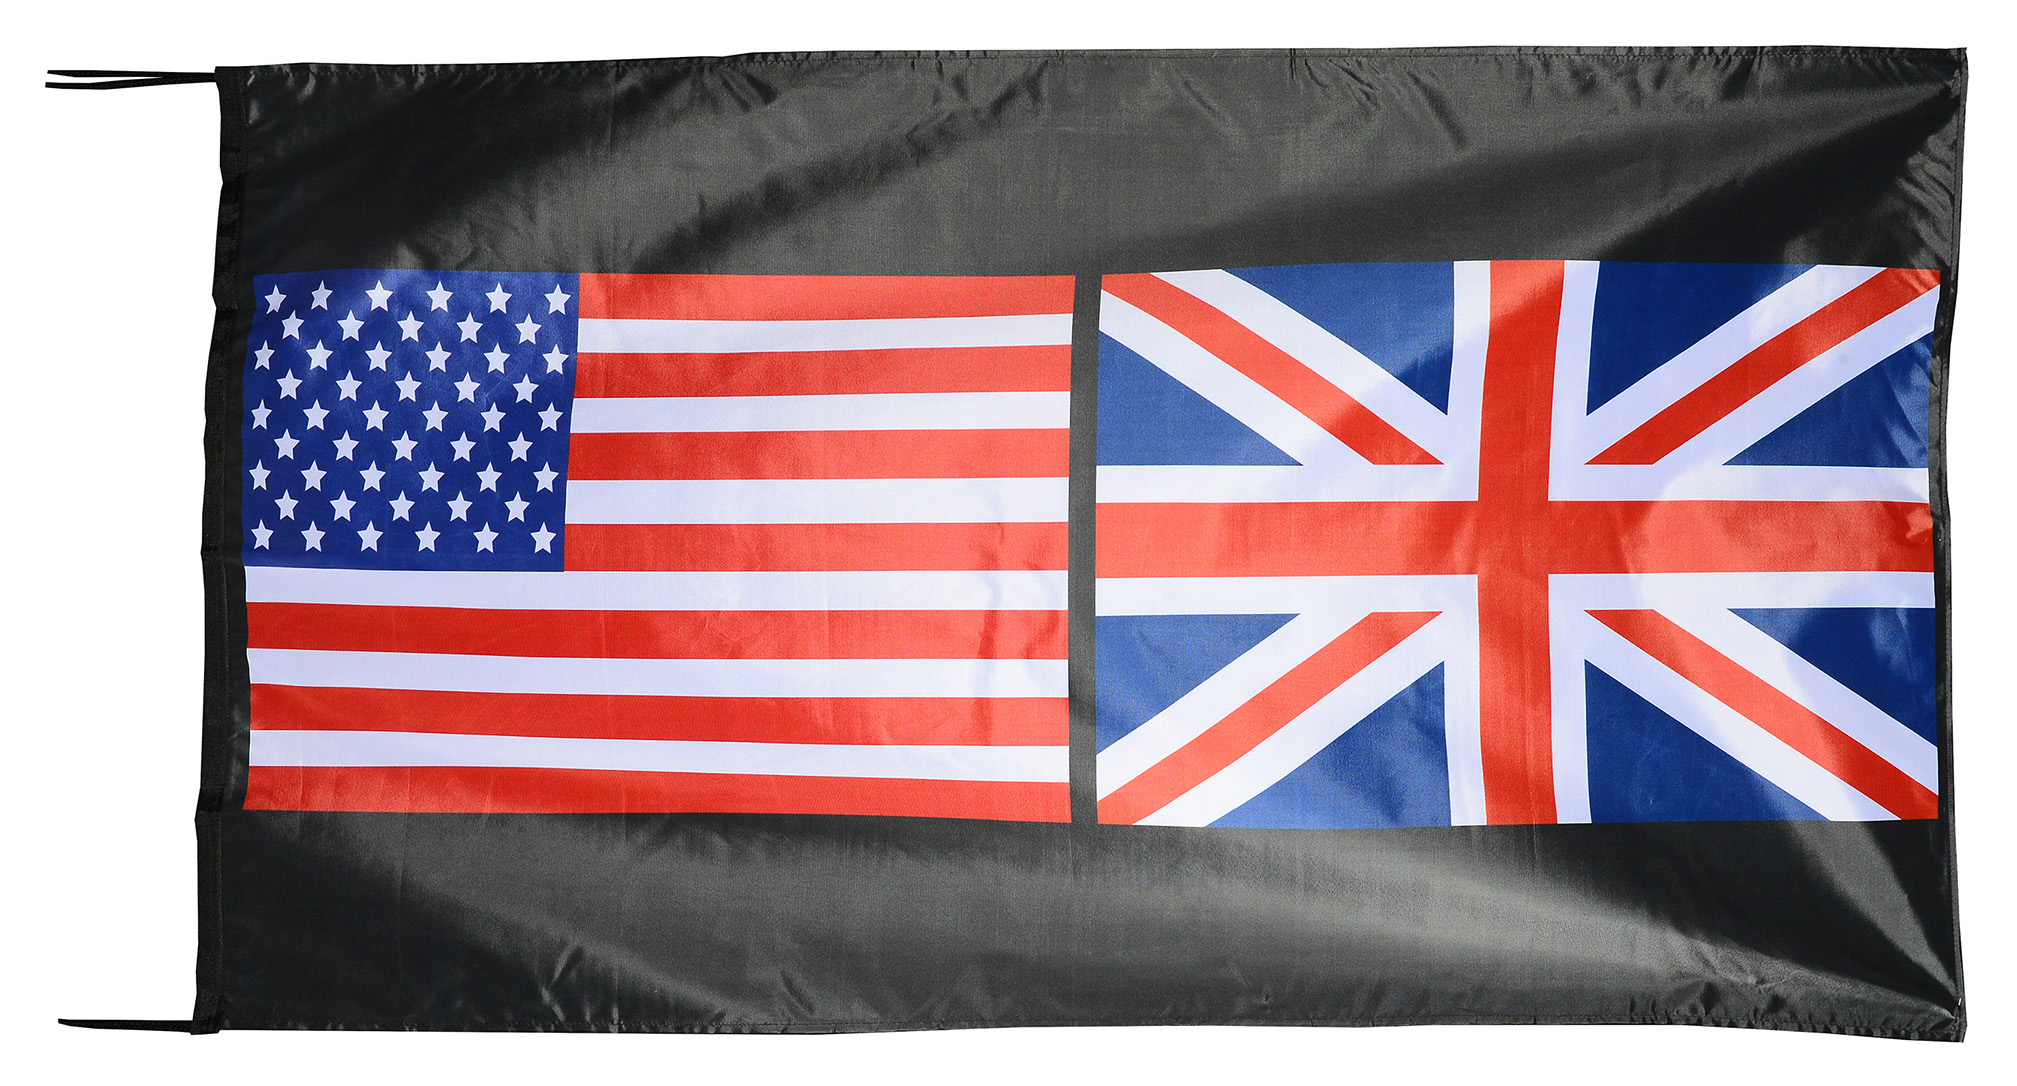 Flag  013 USA / US Country / United States Of America and Massachusetts State / American Patriotic / Pride Hybrid Weather-Resistant Polyester Outdoor Flag Landscape Banner / Vivid Colors / 3 X 5 FT (150 x 90cm) International Flags for Sale